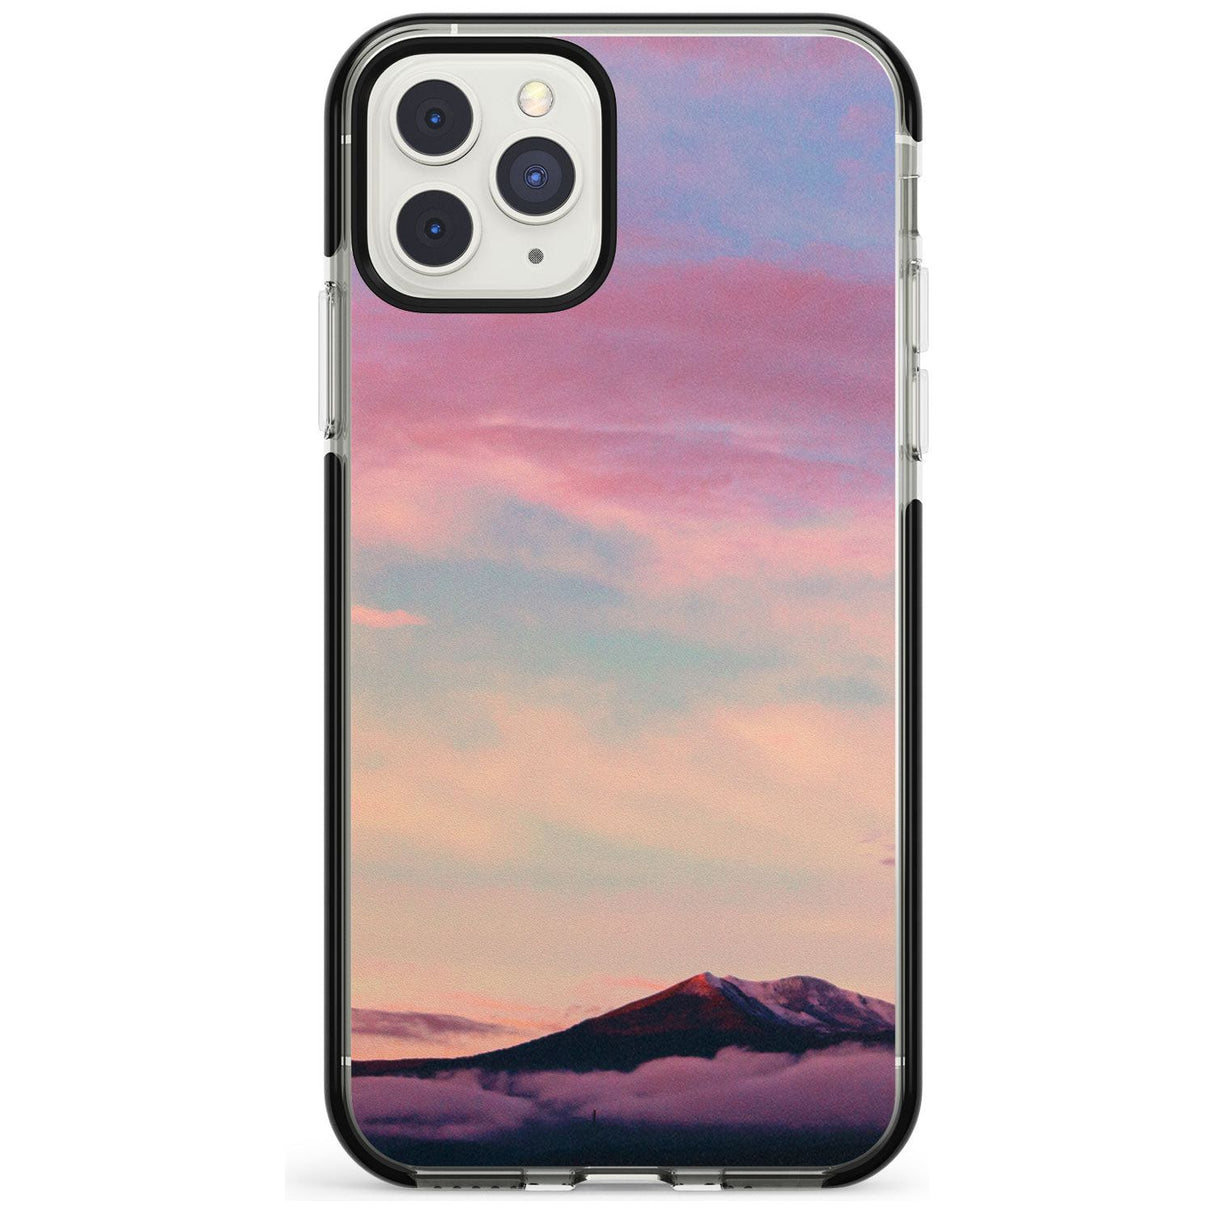 Cloudy Sunset Photograph Black Impact Phone Case for iPhone 11 Pro Max